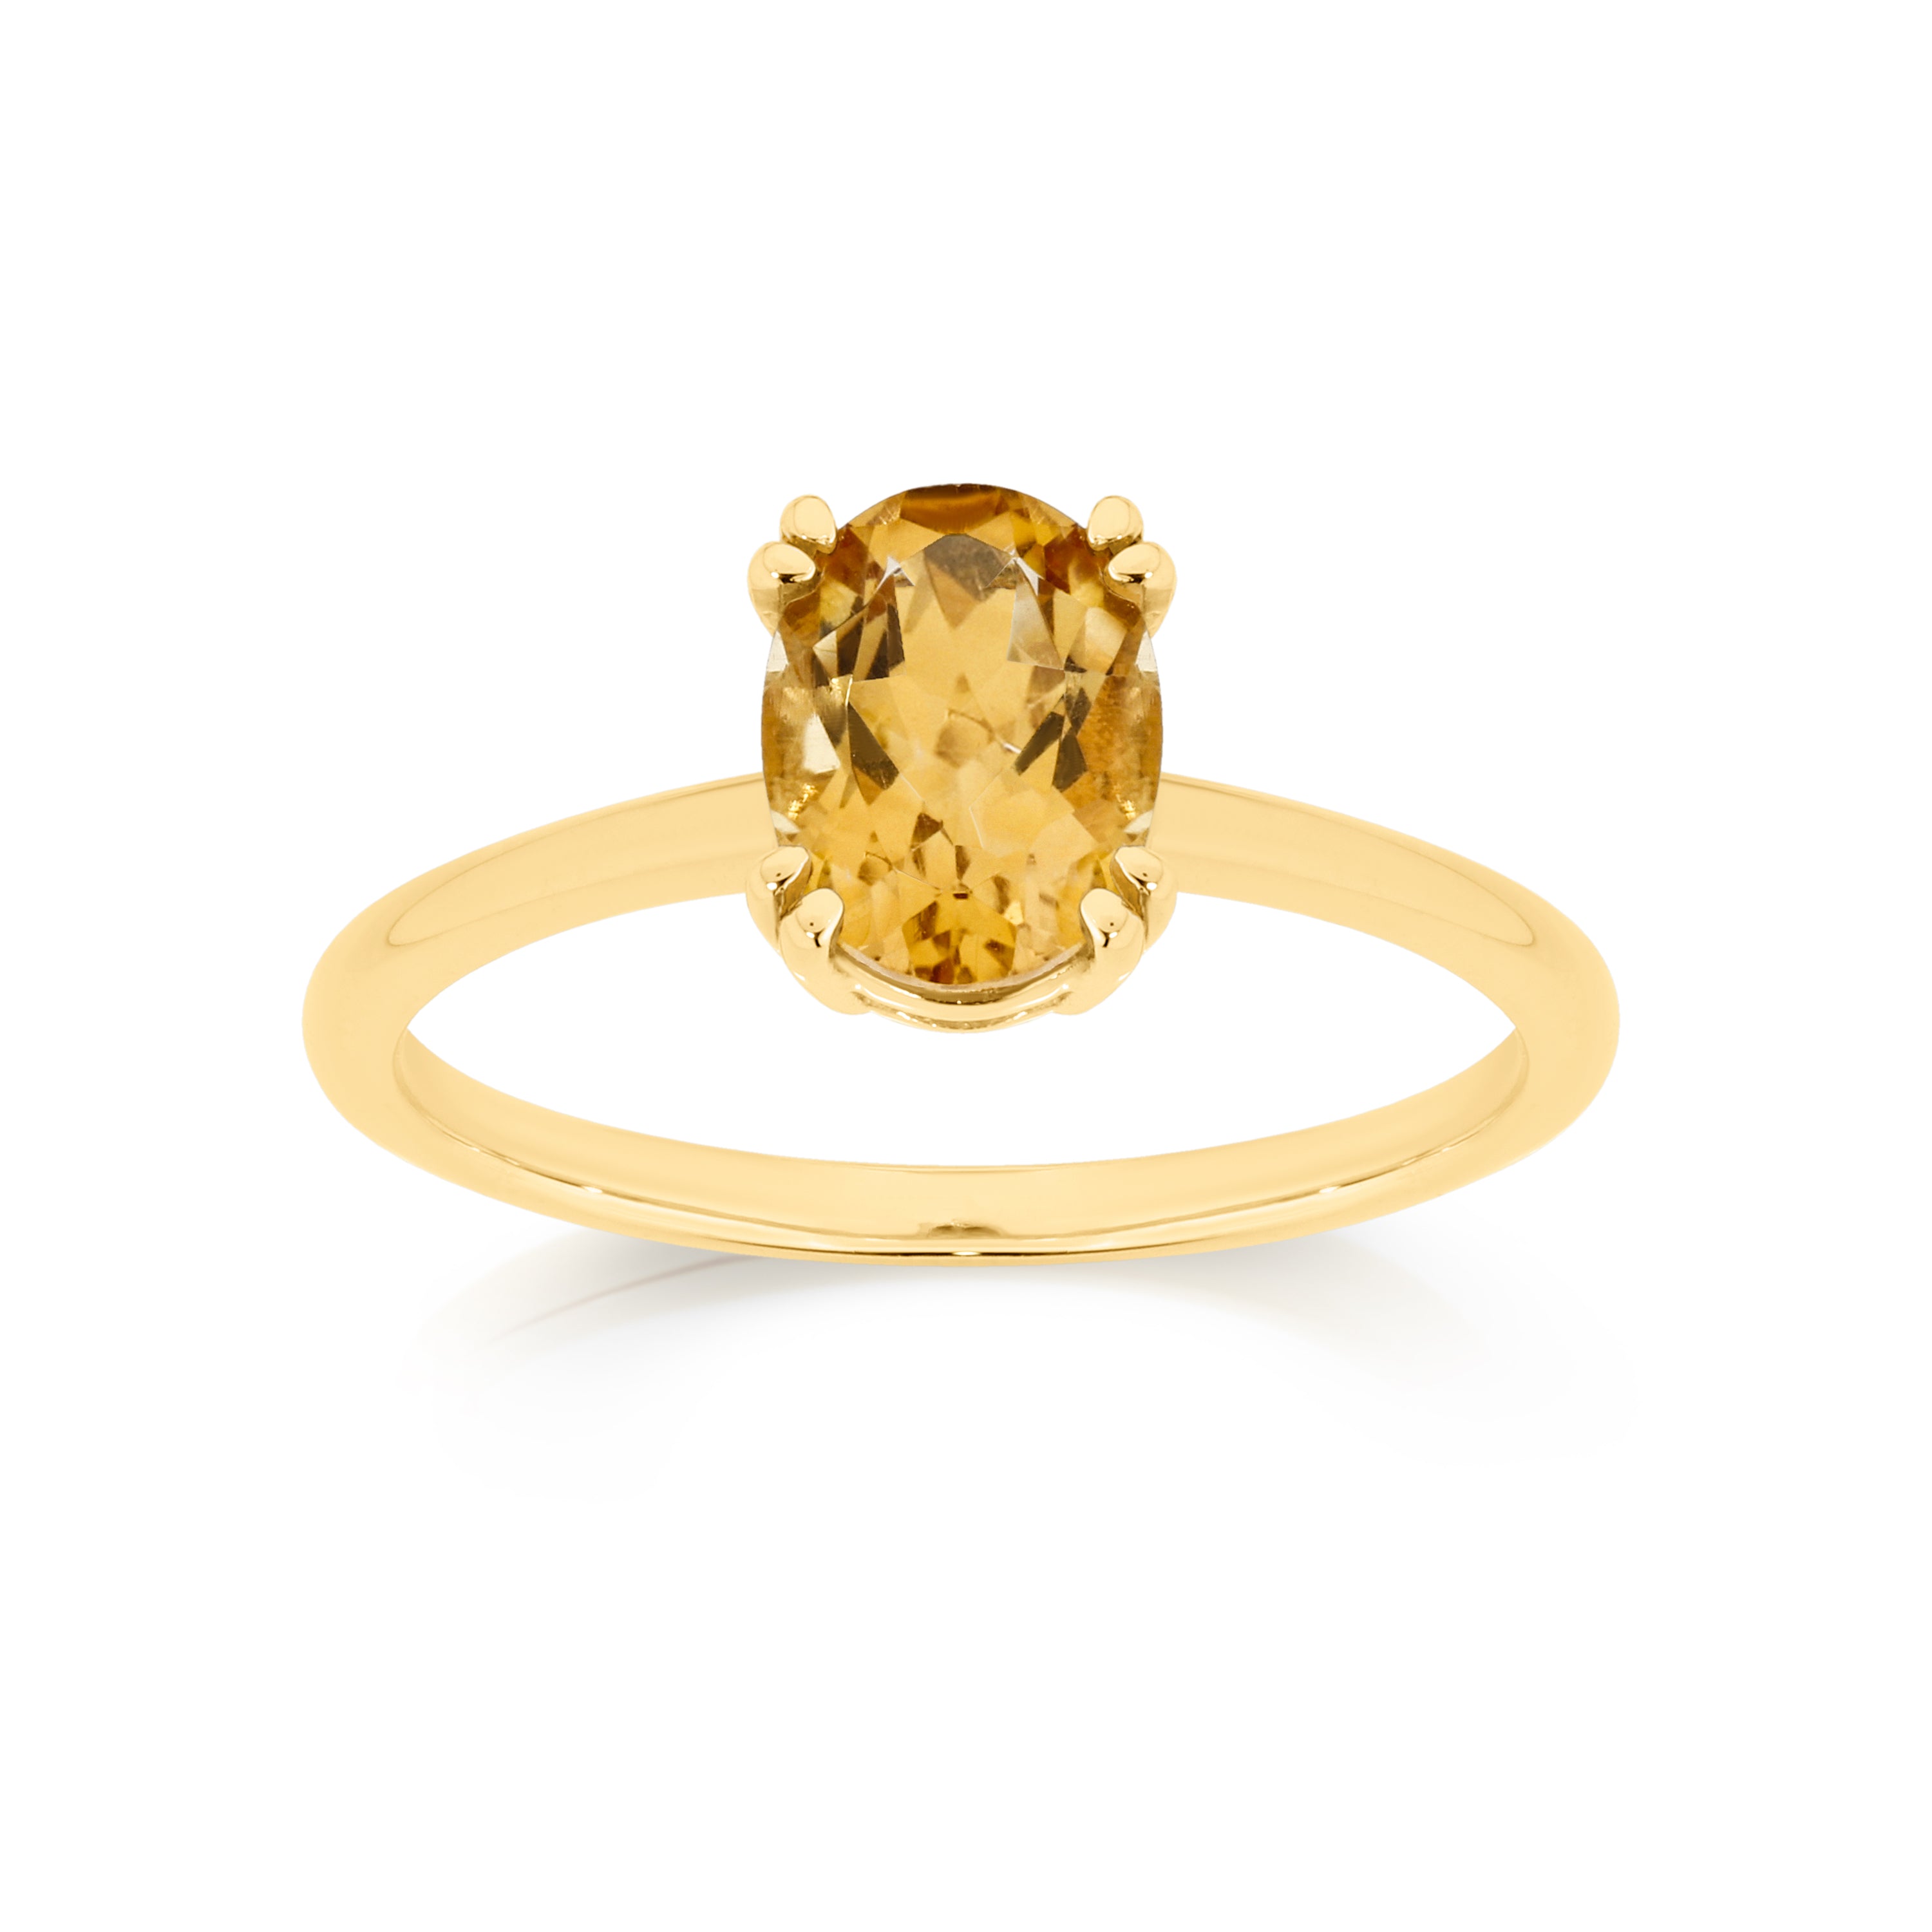 9ct 8x6mm oval citrine solitaire ring